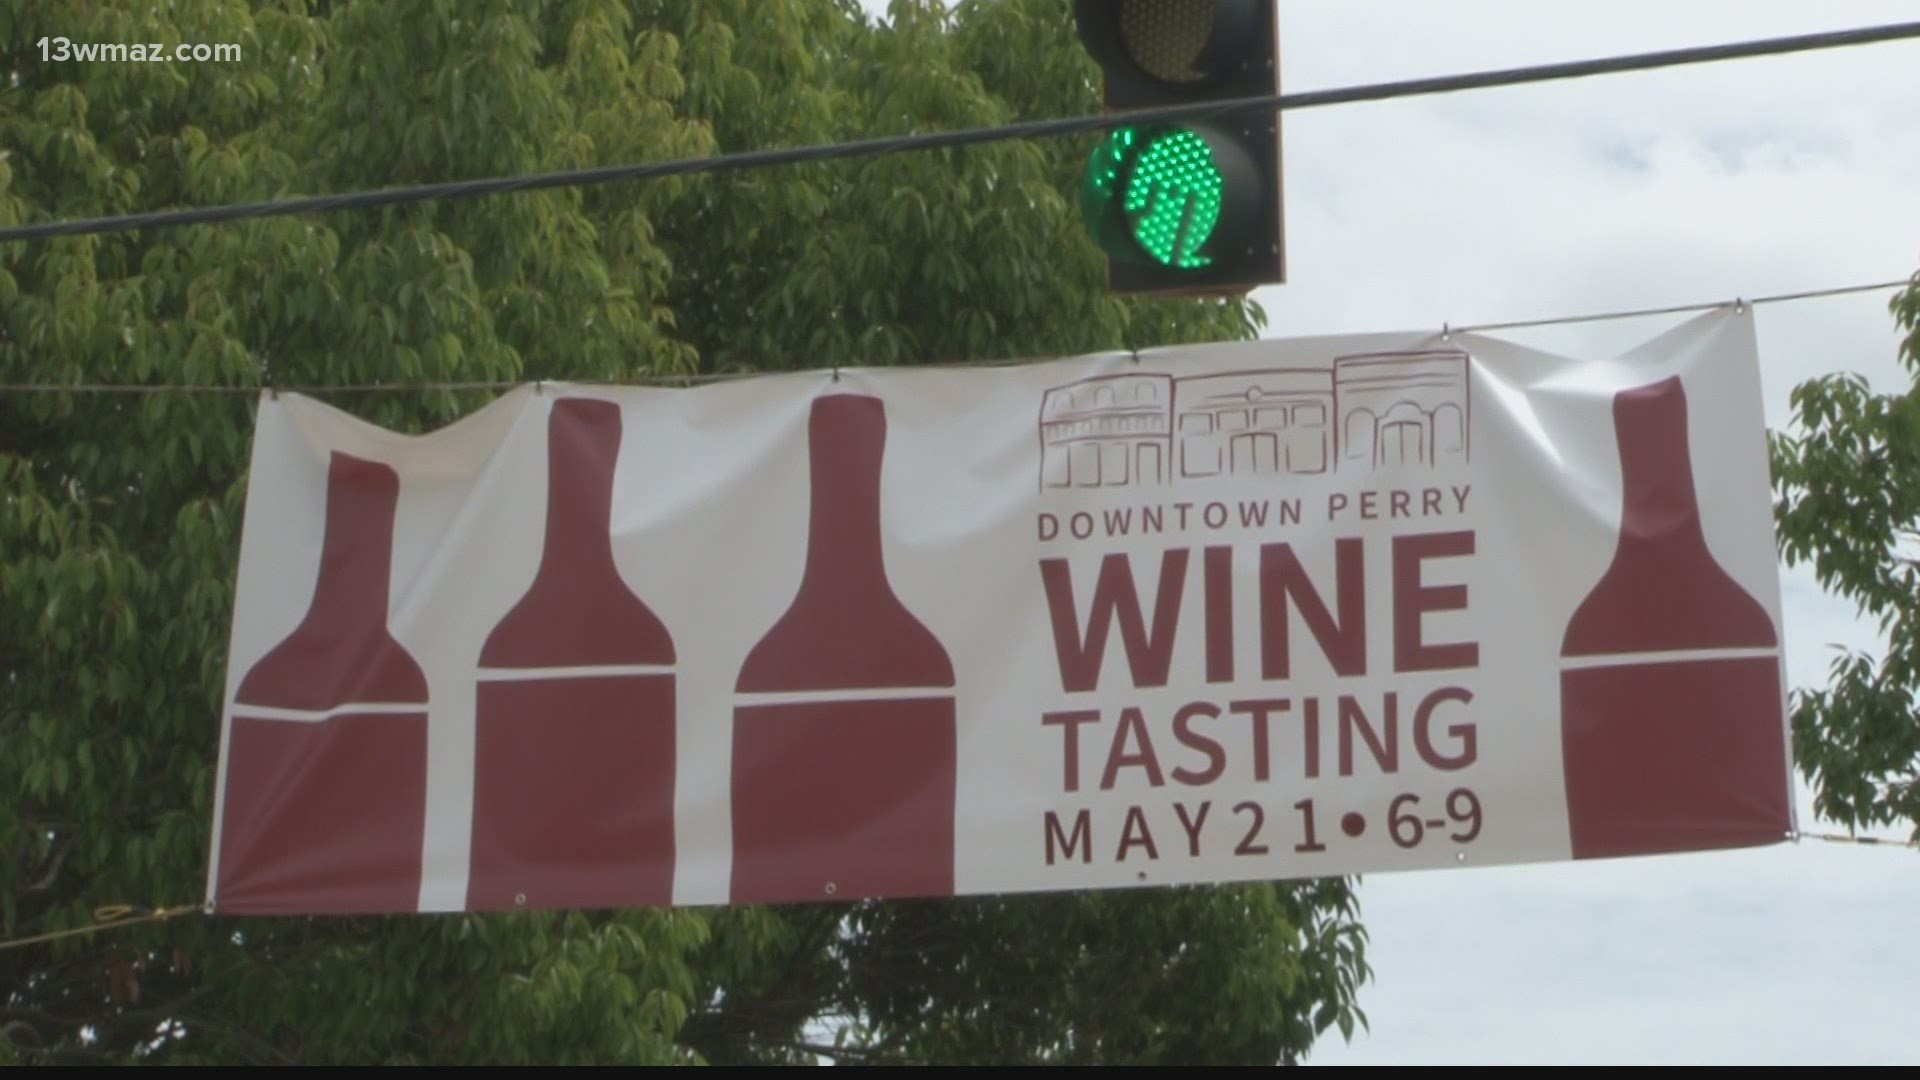 It'll feature 30 stops where participants can sample a variety of wines while exploring downtown shops.